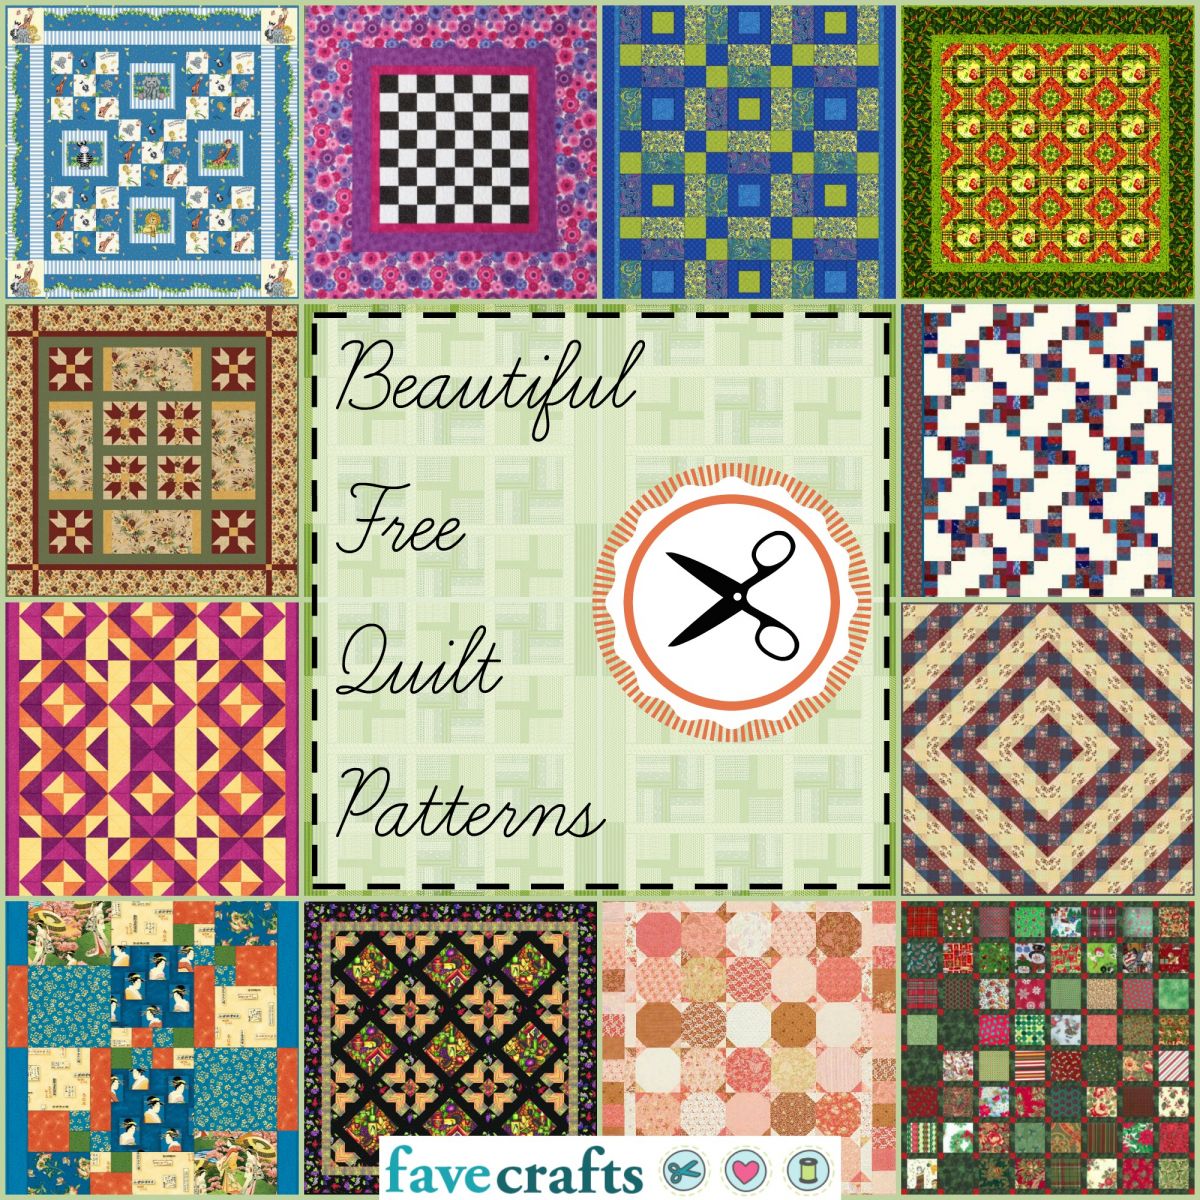 Beautiful Free Quilt Patterns